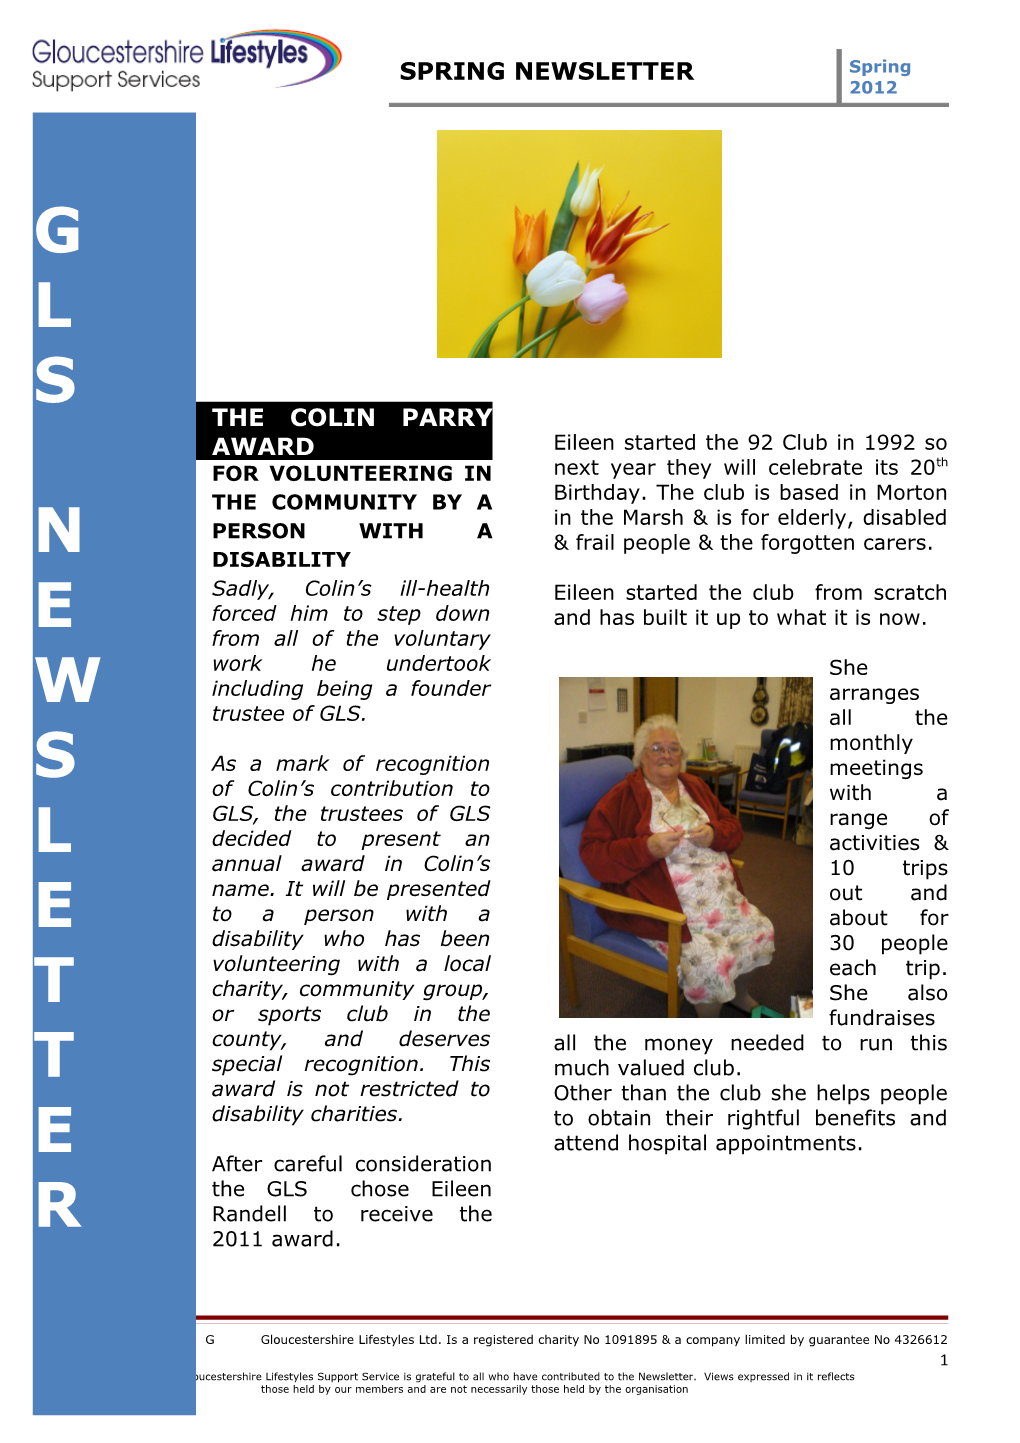 Newsletter of Gloucestershire Lifestyles Support Service